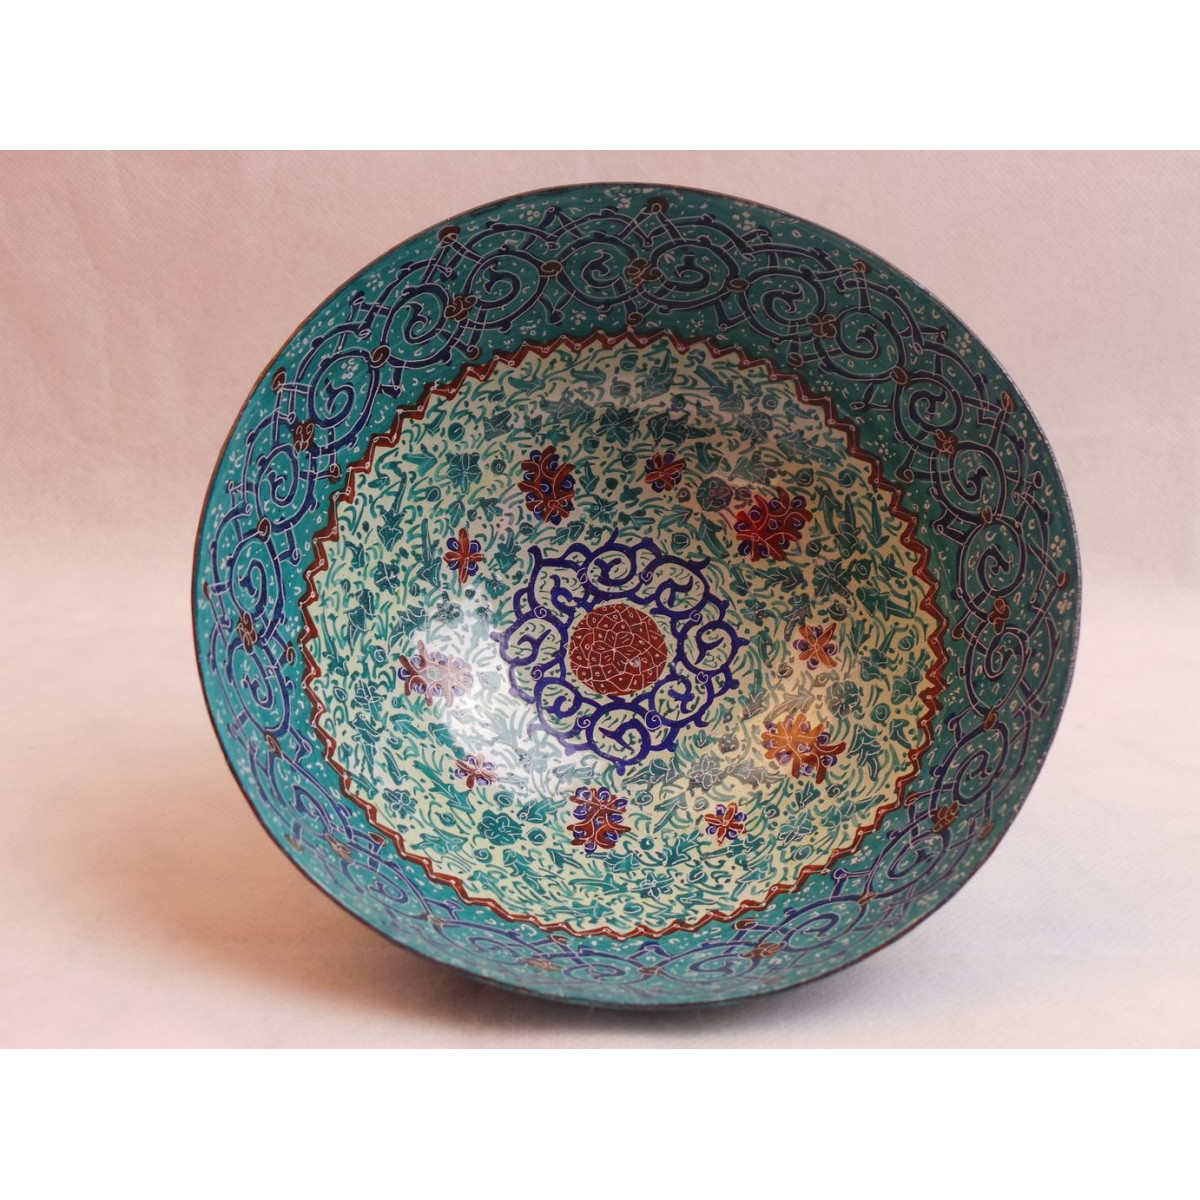 Enamel on Copper Candy/Nuts Bowl - HE3009-Persian Handicrafts